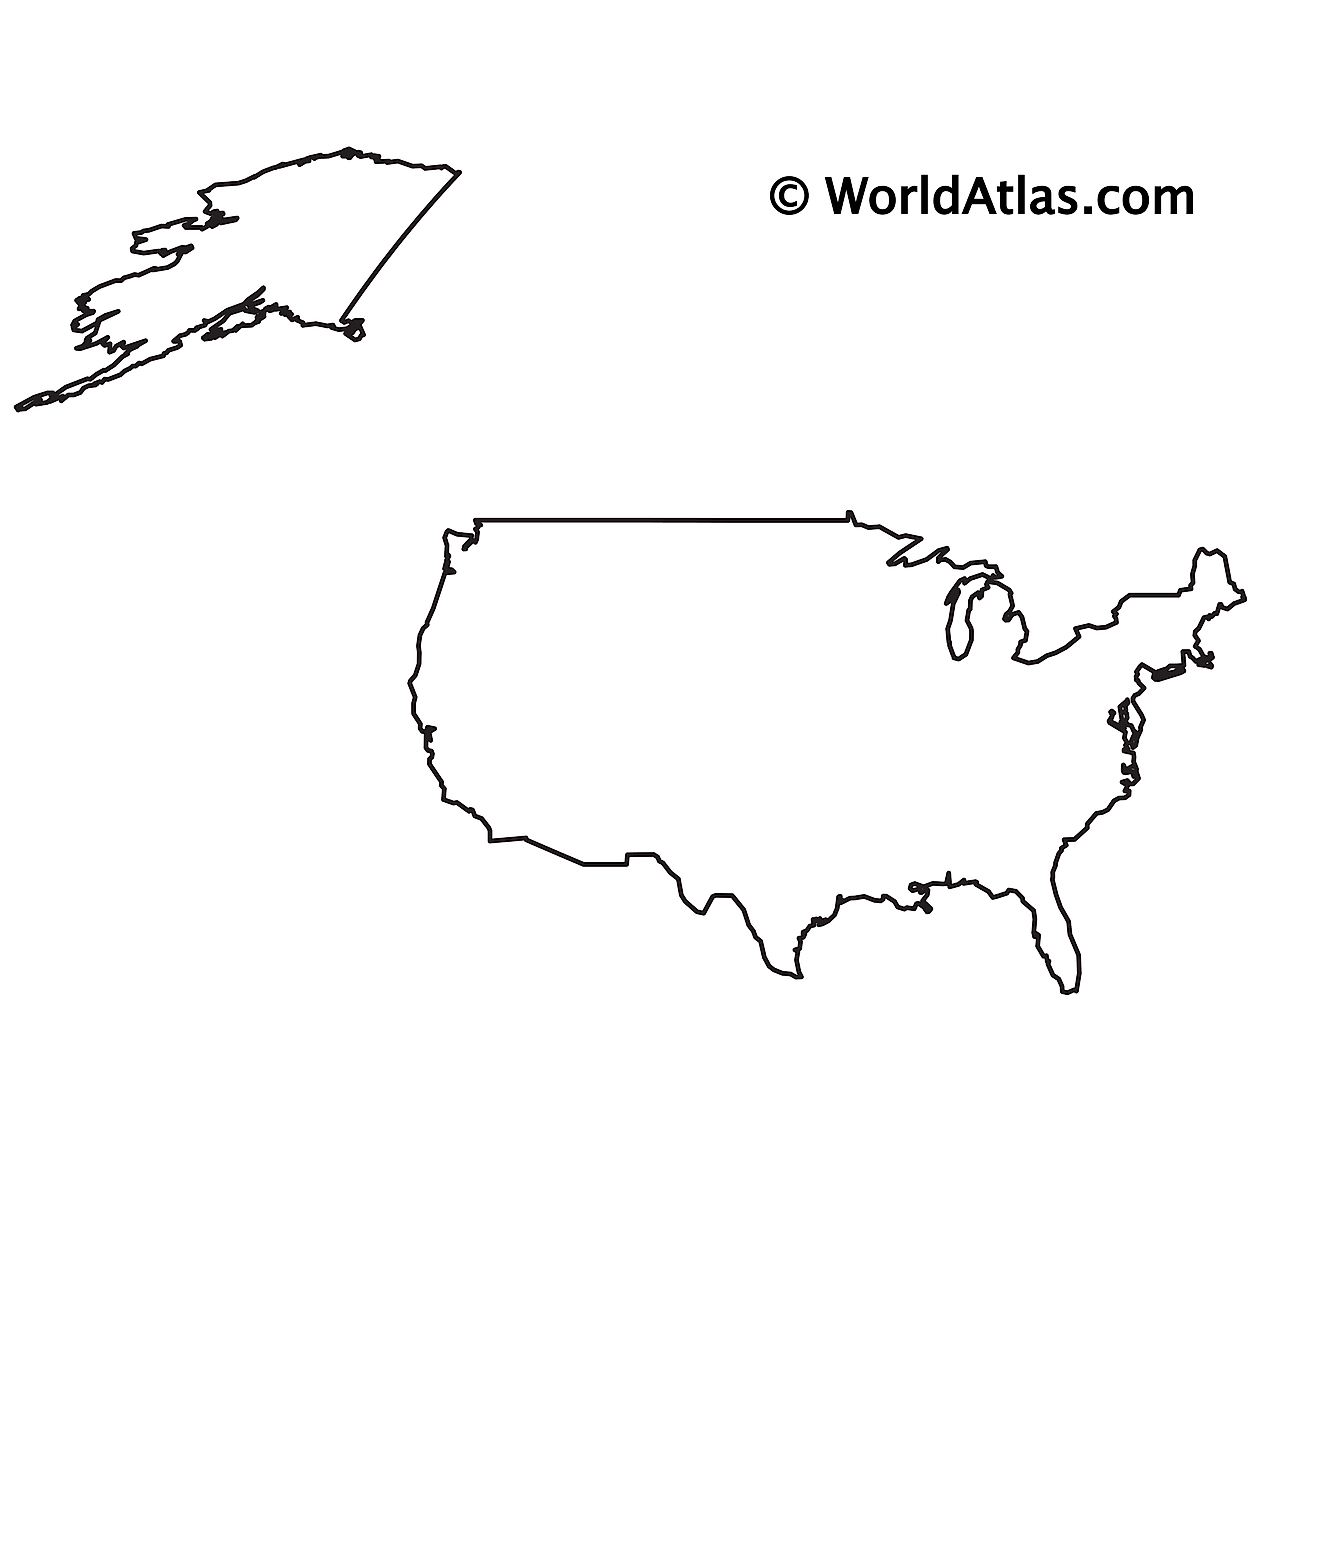 Blank Outline Map of The United States